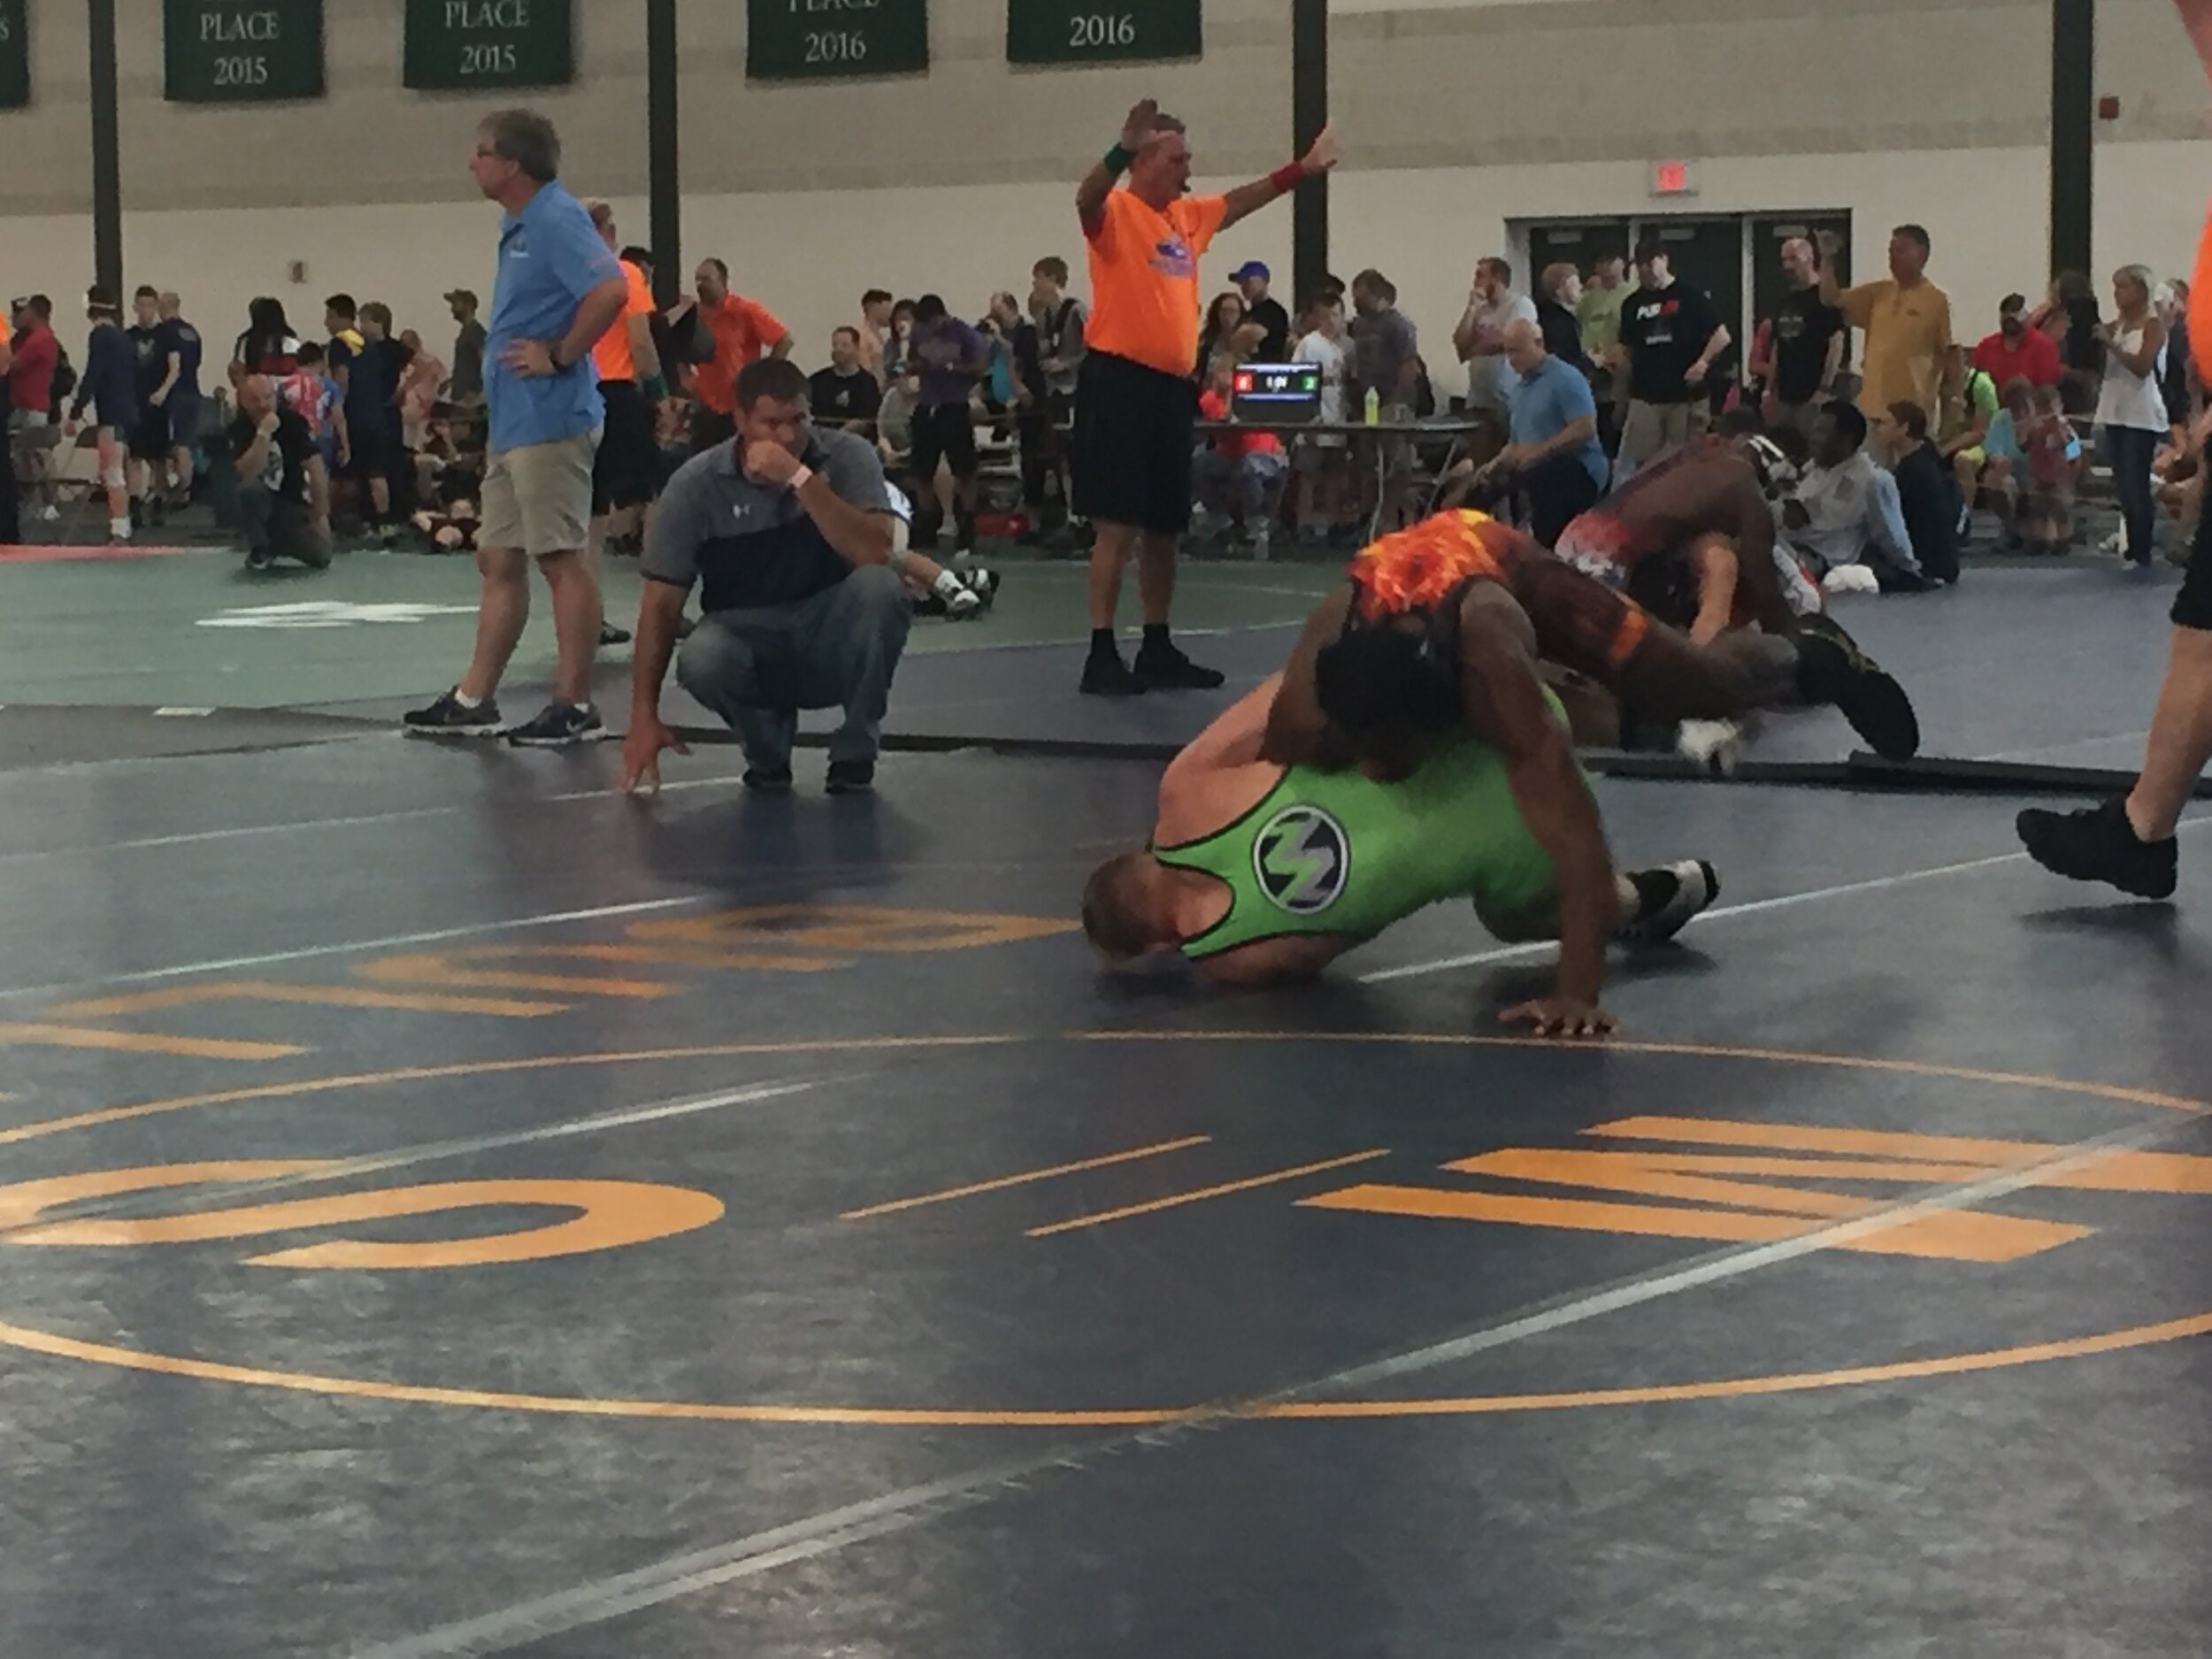 About — Midwest Nationals Wrestling Tournament